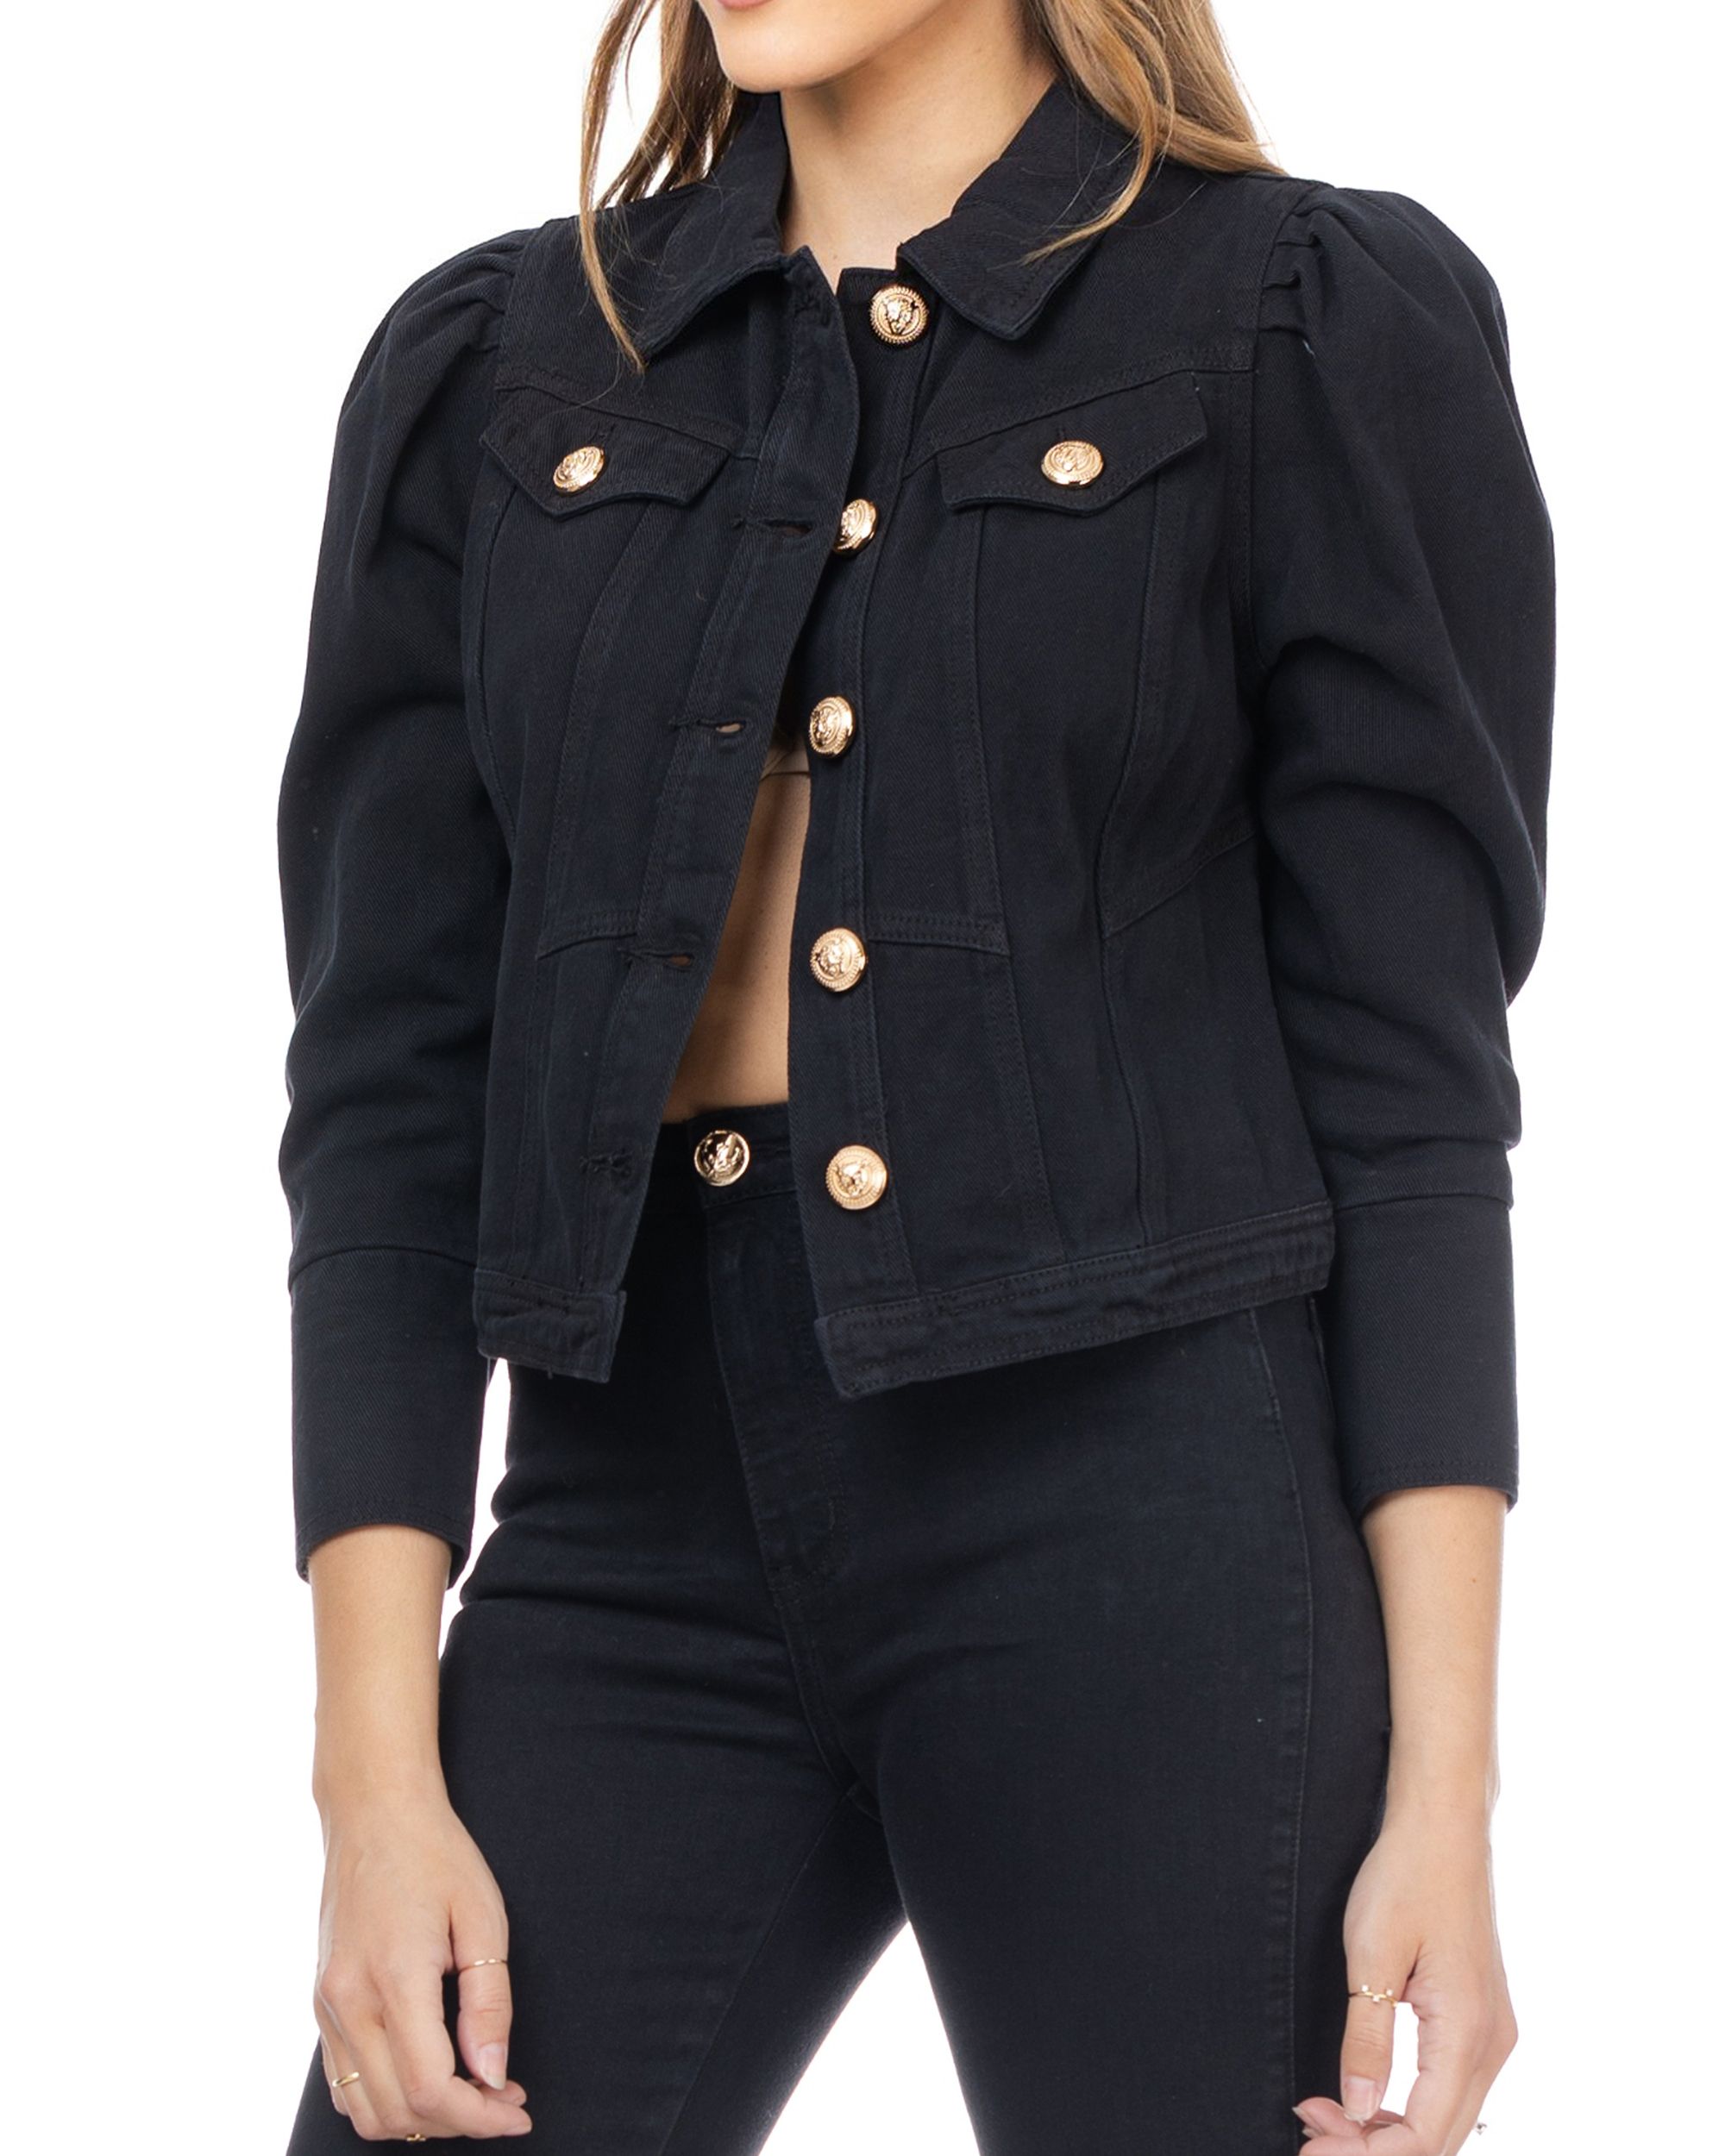 Black Denim Jacket With Gold Buttons